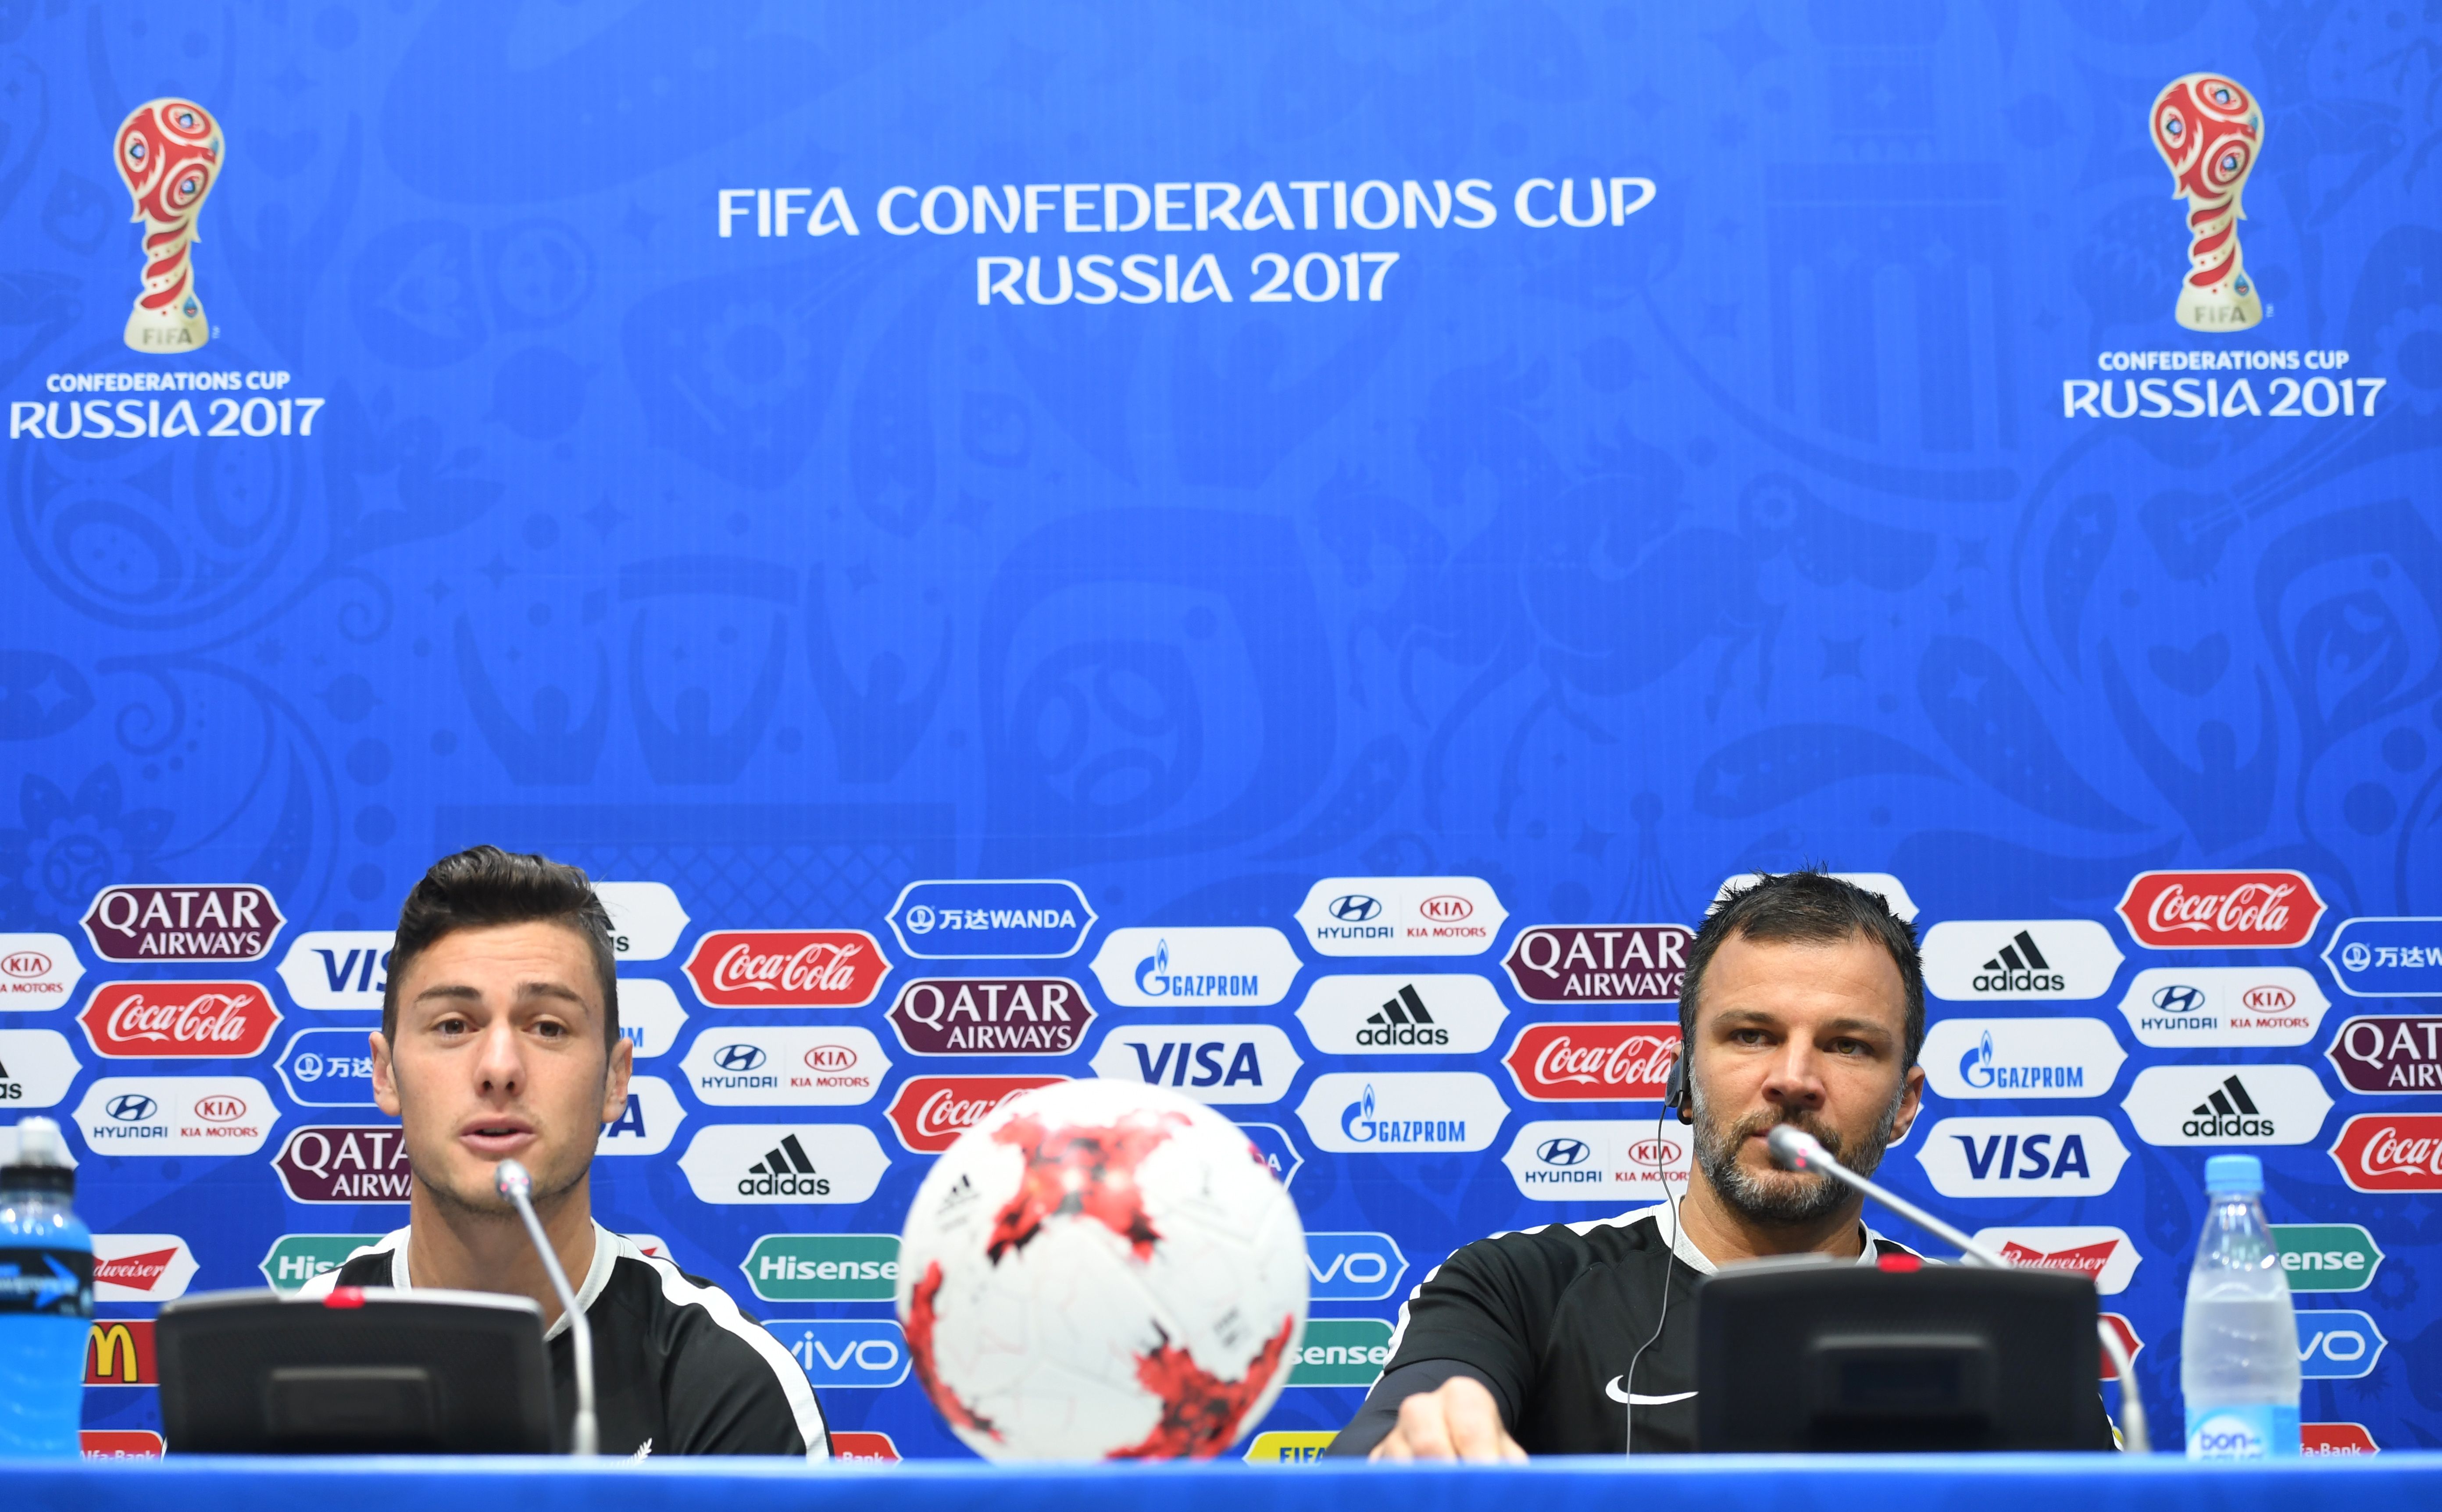 New Zealand´s head coach Anthony Hudson (R) and New Zealand´s midfielder Marco Royas give a press conference the day before their group A match against Mexico in the Russia 2017 Confederation Cup football tournament at the Fisht Stadium in Sotchi on June 20, 2017. / AFP PHOTO / PATRIK STOLLARZ        (Photo credit should read PATRIK STOLLARZ/AFP/Getty Images)